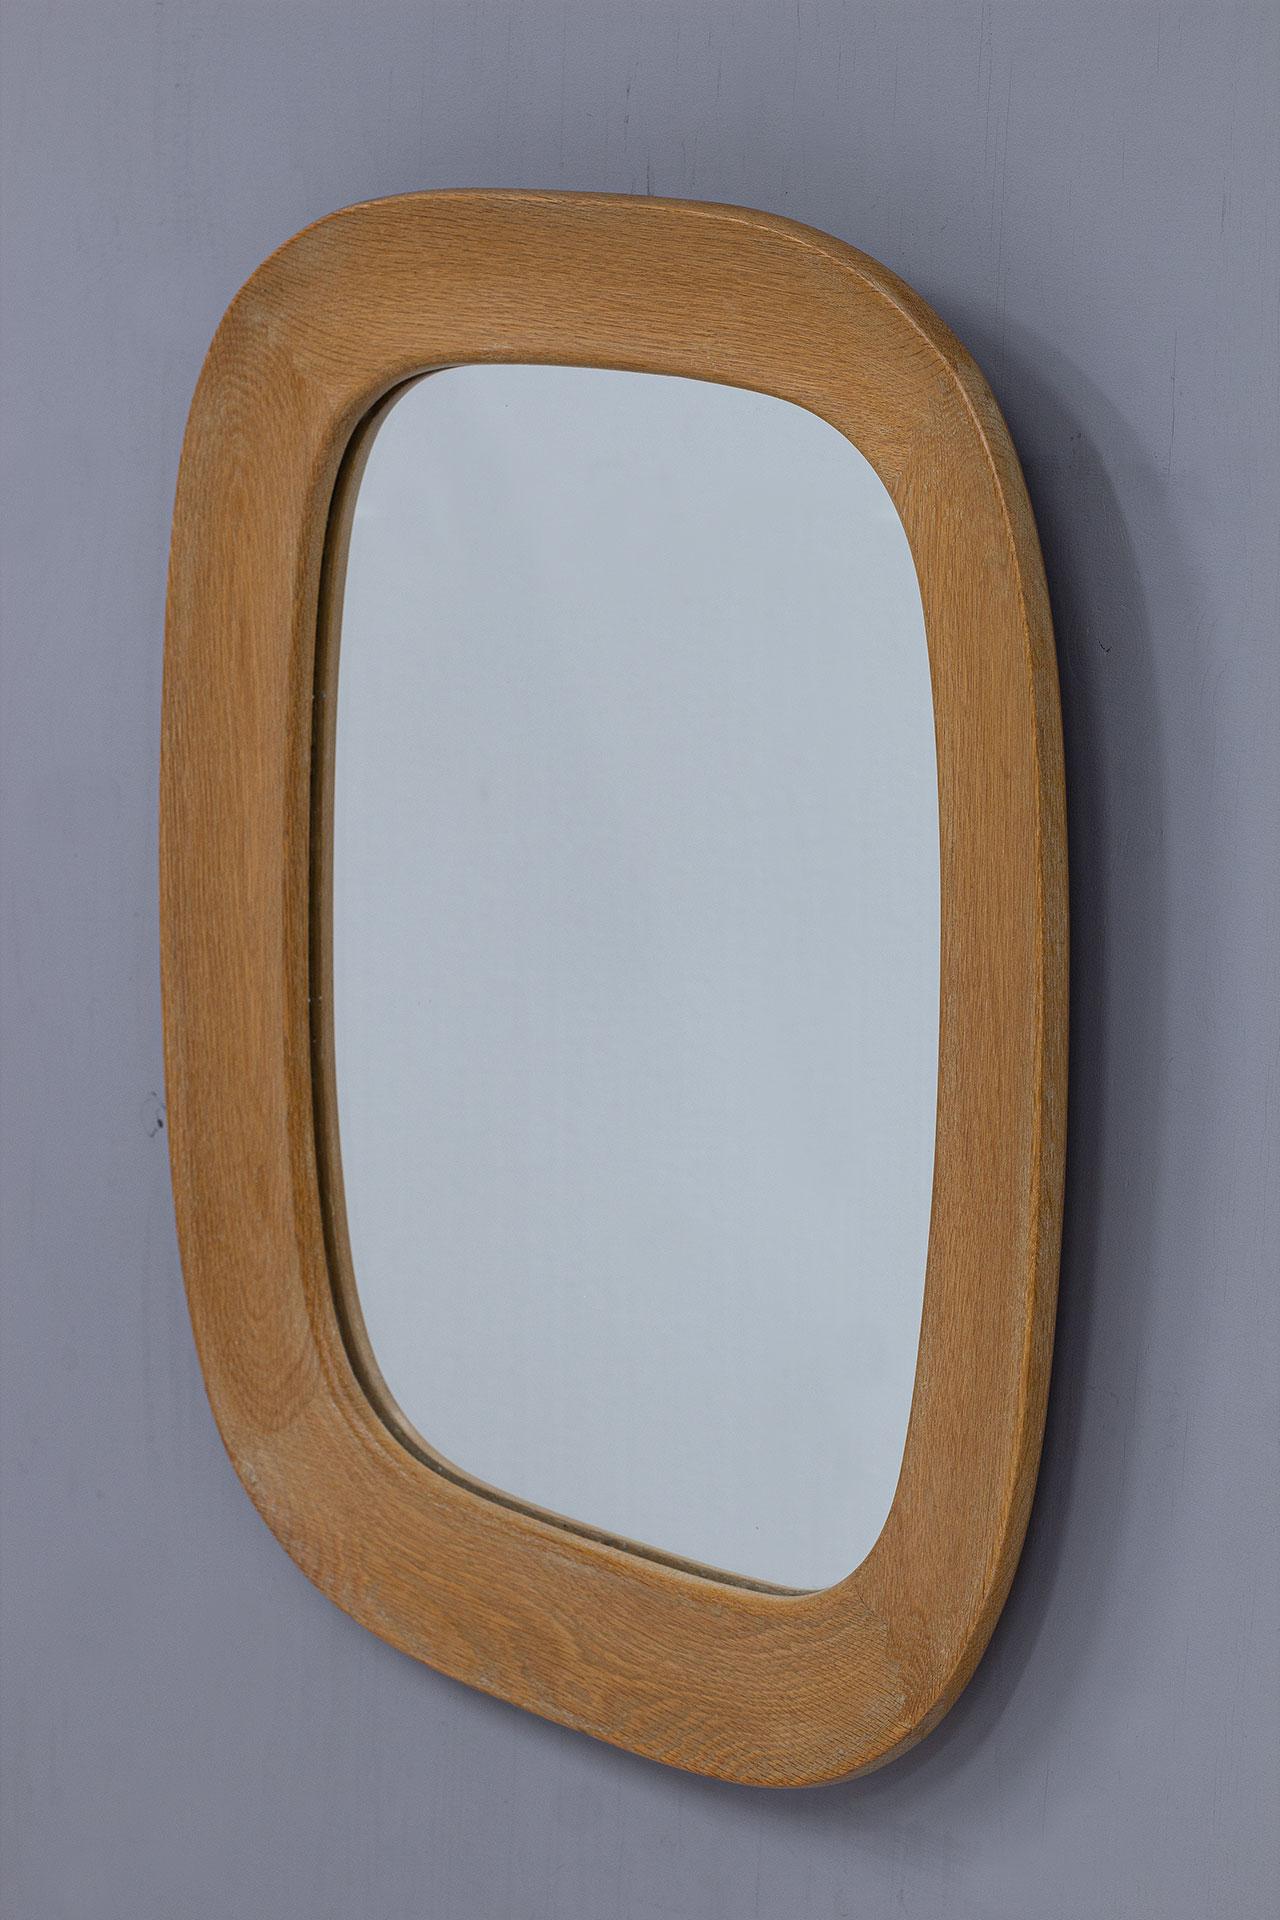 Elegant oval shaped oak wall mirror designed by Per Argén. Manufactured 
by Fröseke AB Nybrofabriken in Sweden during the 1950s. Made from solid oak frame with a nice zigzag joinery detail. Labeled in the back.

Very good vintage condition.